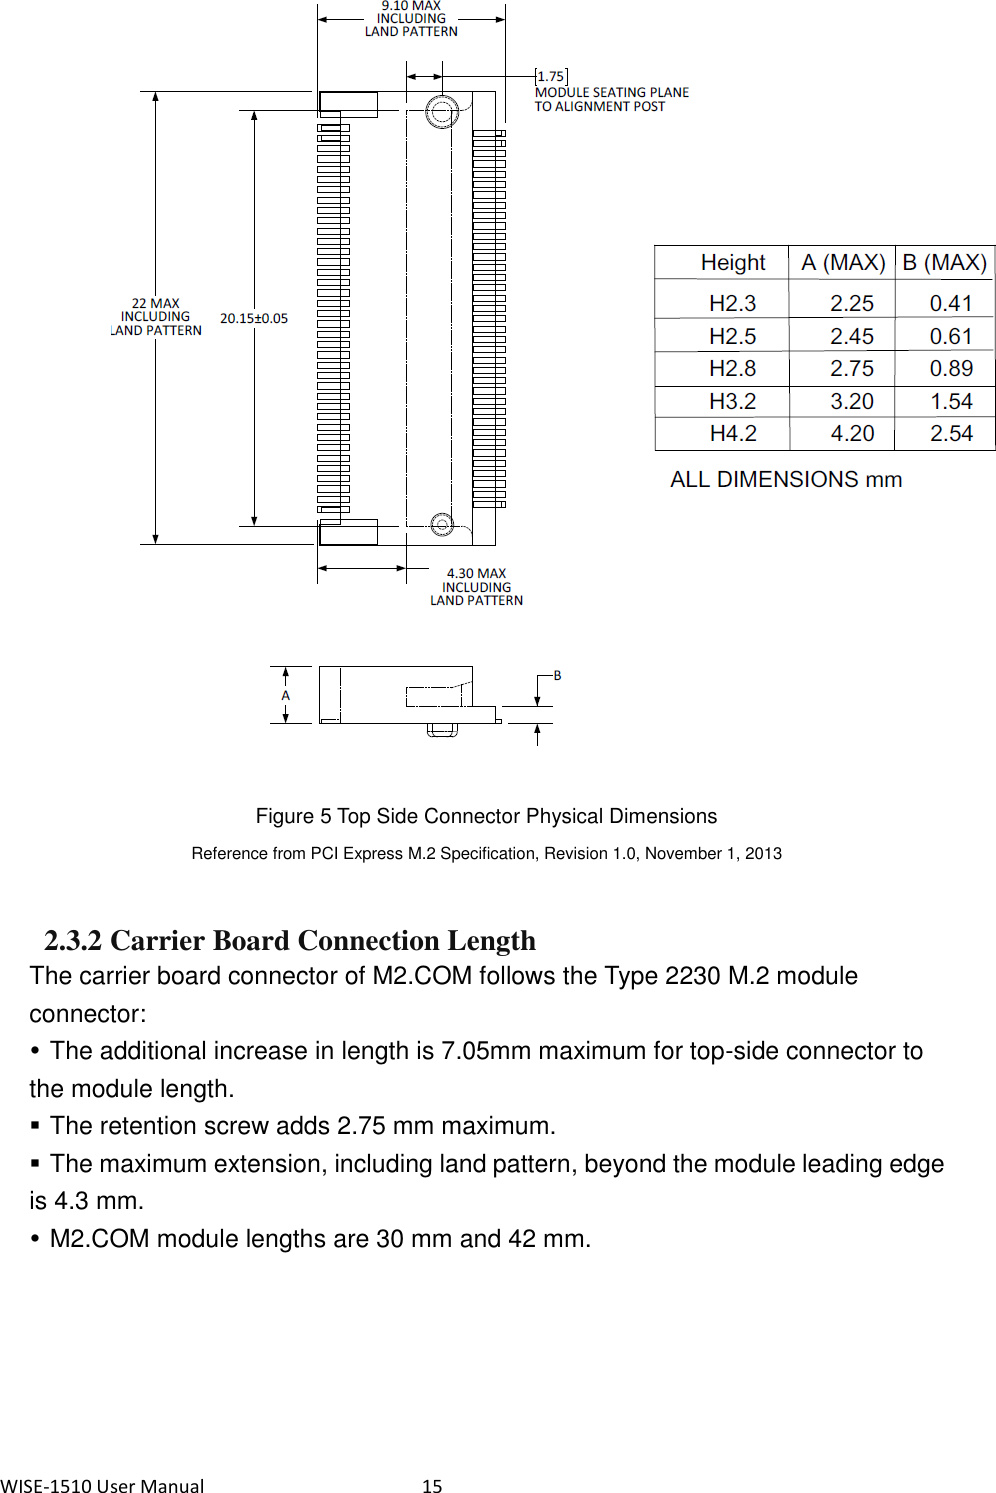 WISE-1510 User Manual  15   Figure 5 Top Side Connector Physical Dimensions Reference from PCI Express M.2 Specification, Revision 1.0, November 1, 2013  2.3.2 Carrier Board Connection Length The carrier board connector of M2.COM follows the Type 2230 M.2 module connector:  The additional increase in length is 7.05mm maximum for top-side connector to the module length.  The retention screw adds 2.75 mm maximum.  The maximum extension, including land pattern, beyond the module leading edge is 4.3 mm.  M2.COM module lengths are 30 mm and 42 mm. 